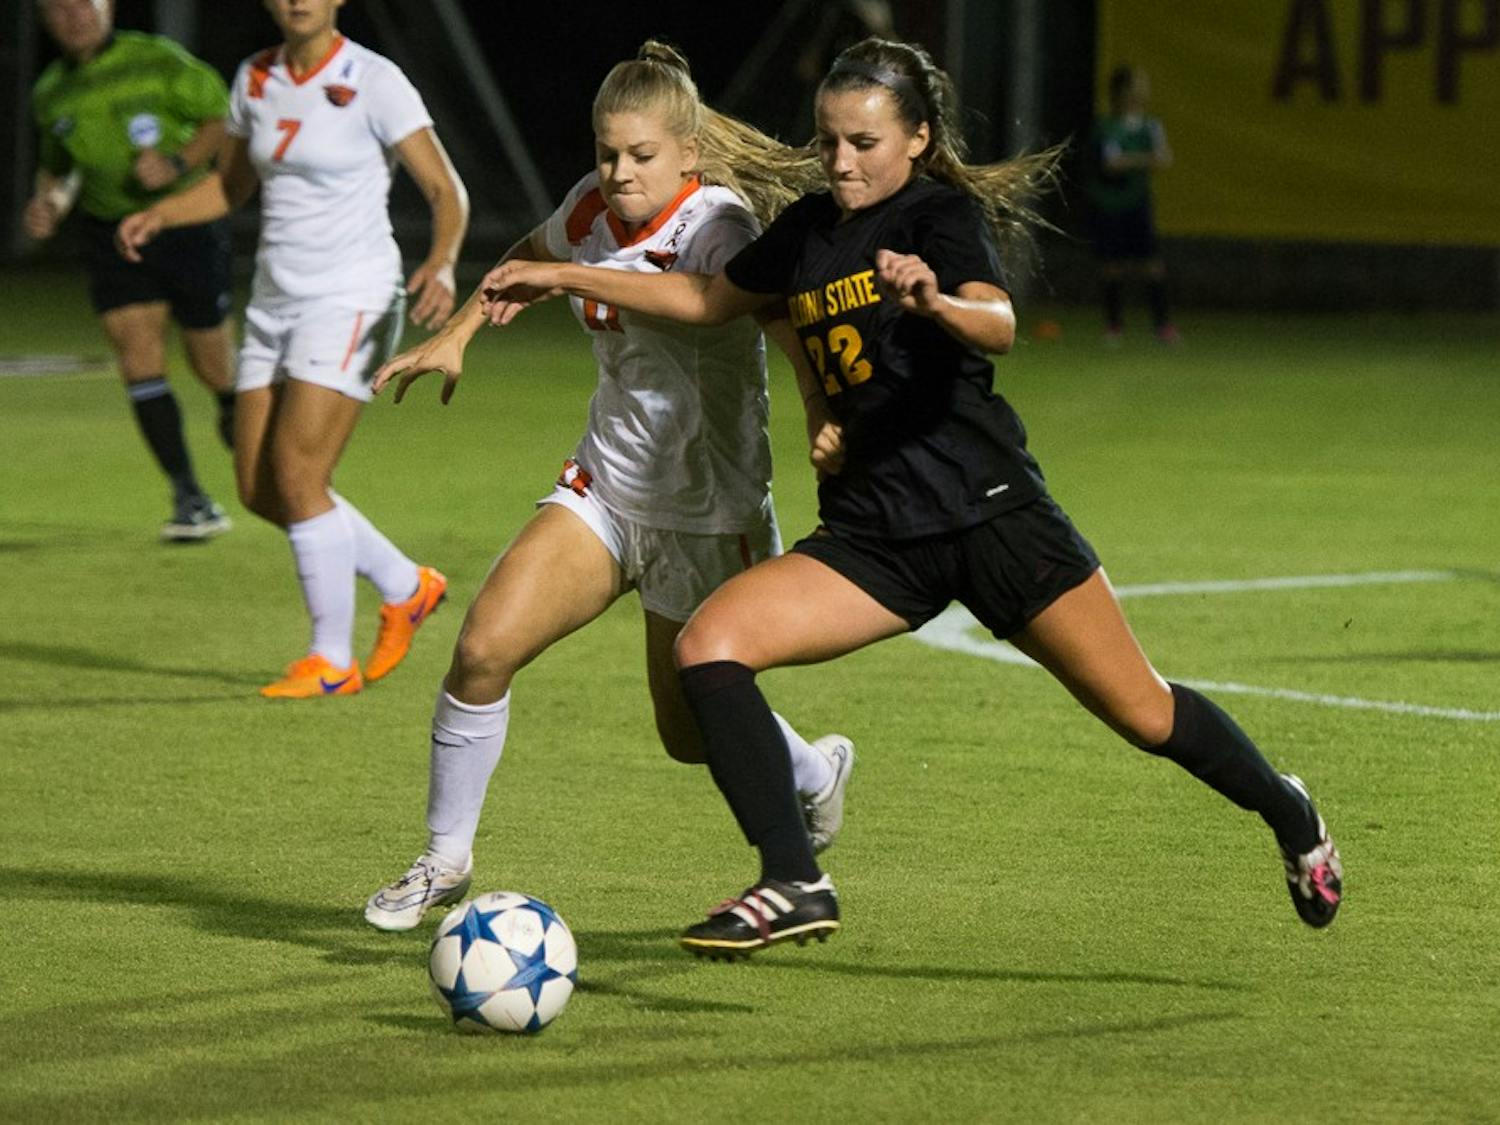 Sophomore defender Madison Stark takes control of the ball against Oregon on Friday, Oct. 23, 2015, at Sun Devil Soccer Stadium in Tempe.